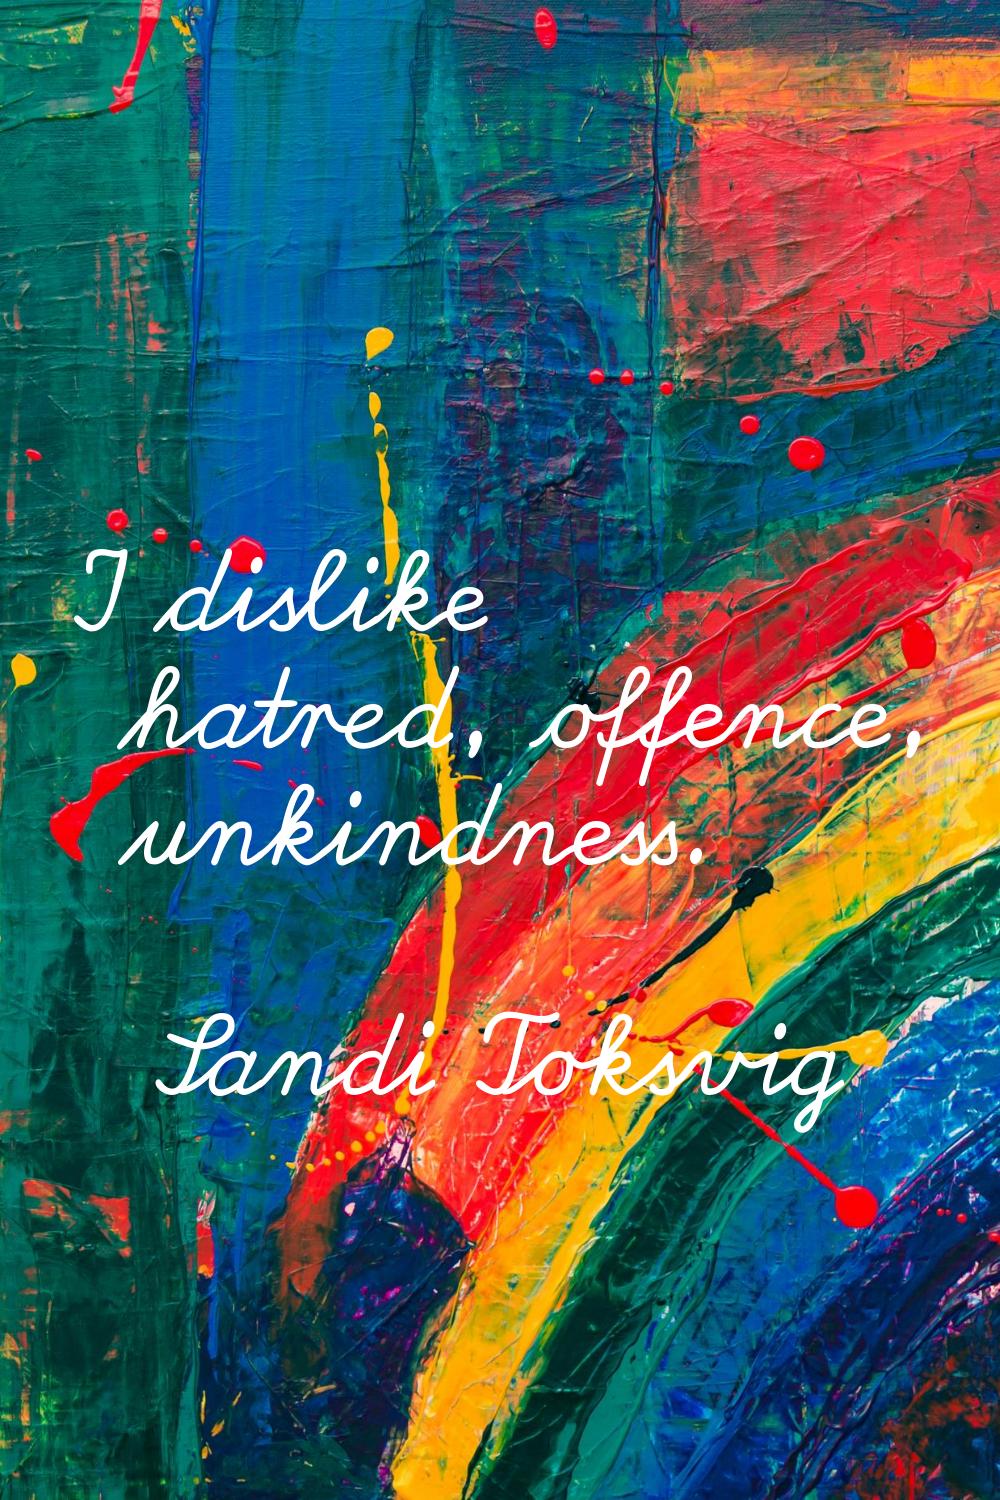 I dislike hatred, offence, unkindness.